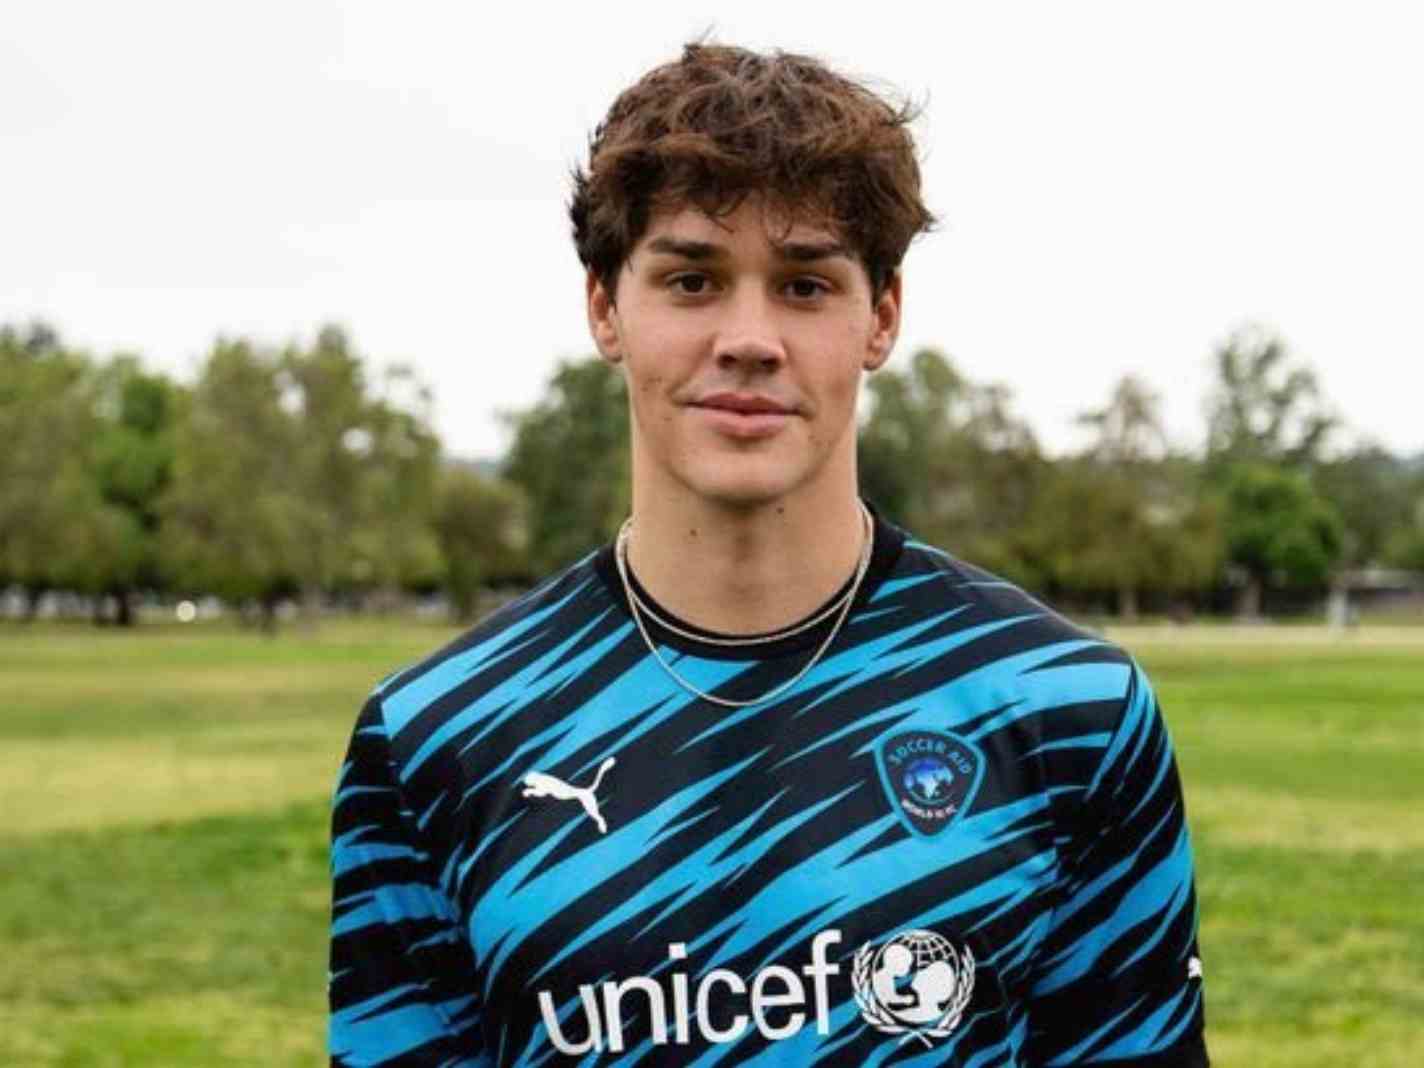 The Real LeBron James Of Soccer: Noah Beck impresses Twitter with Soccer Aid display